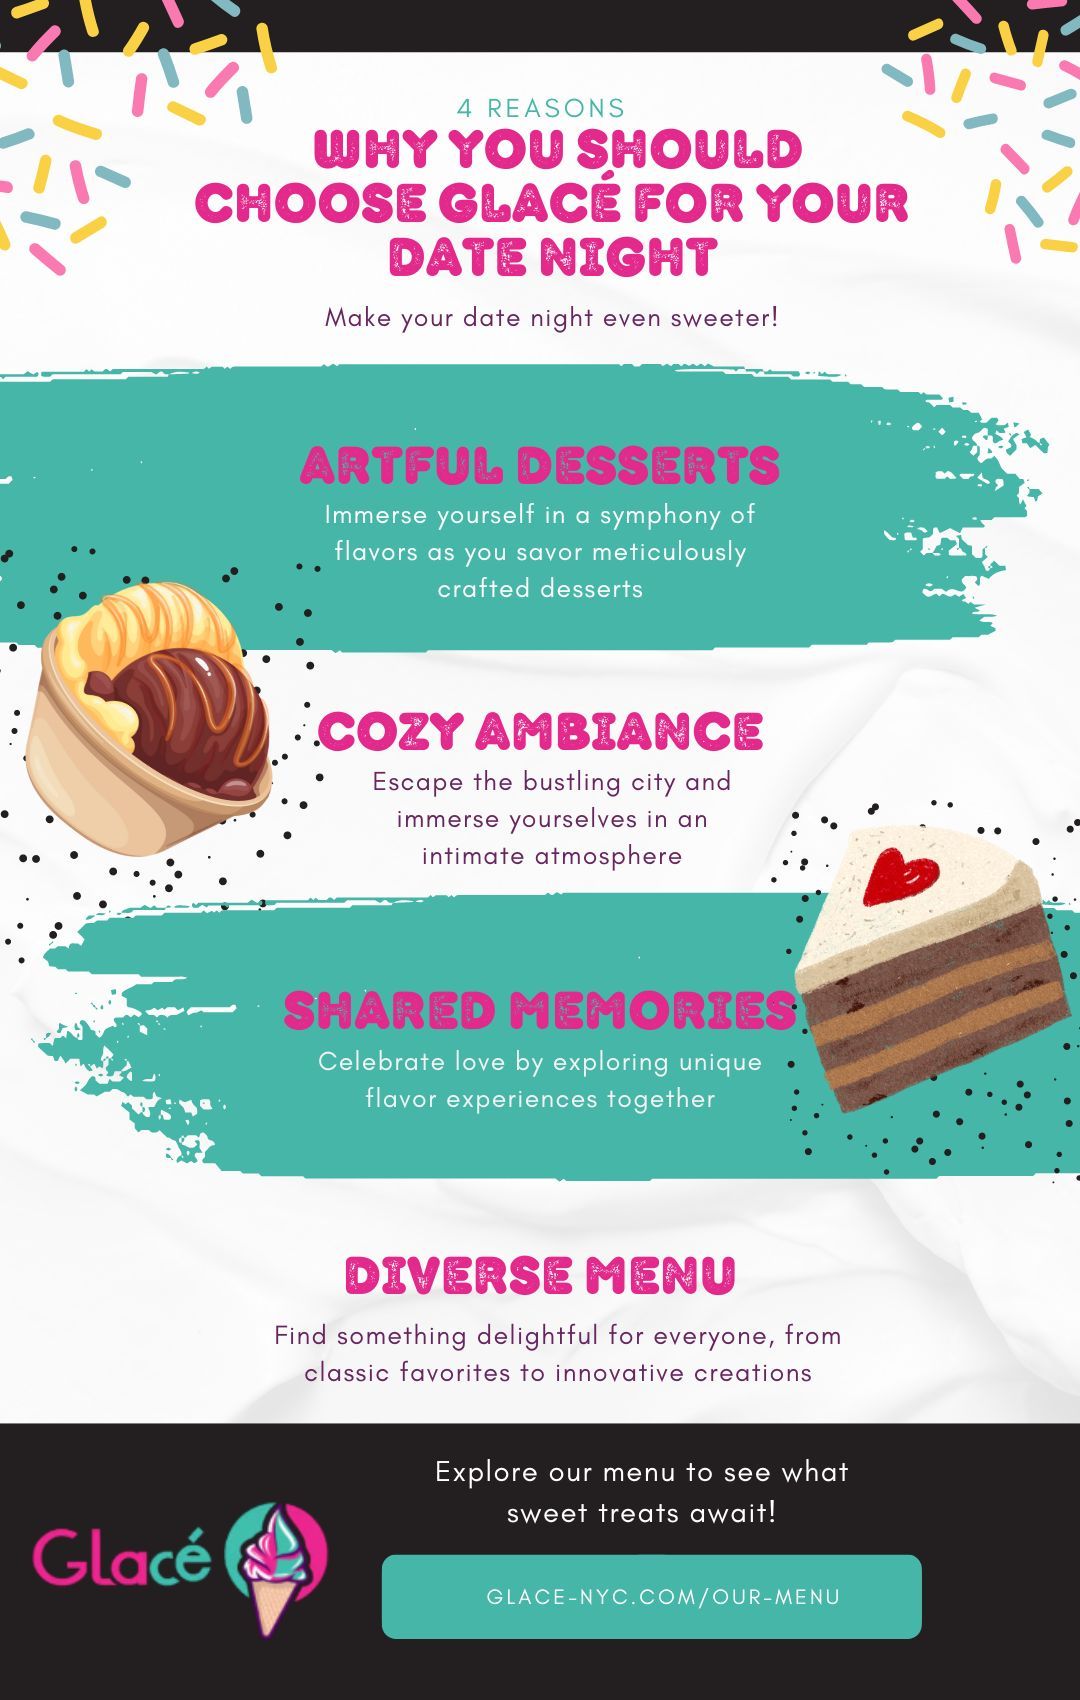 M37811 - Infographic - 4 Reasons Why You Should Choose Glacé for Your Date Night.jpg